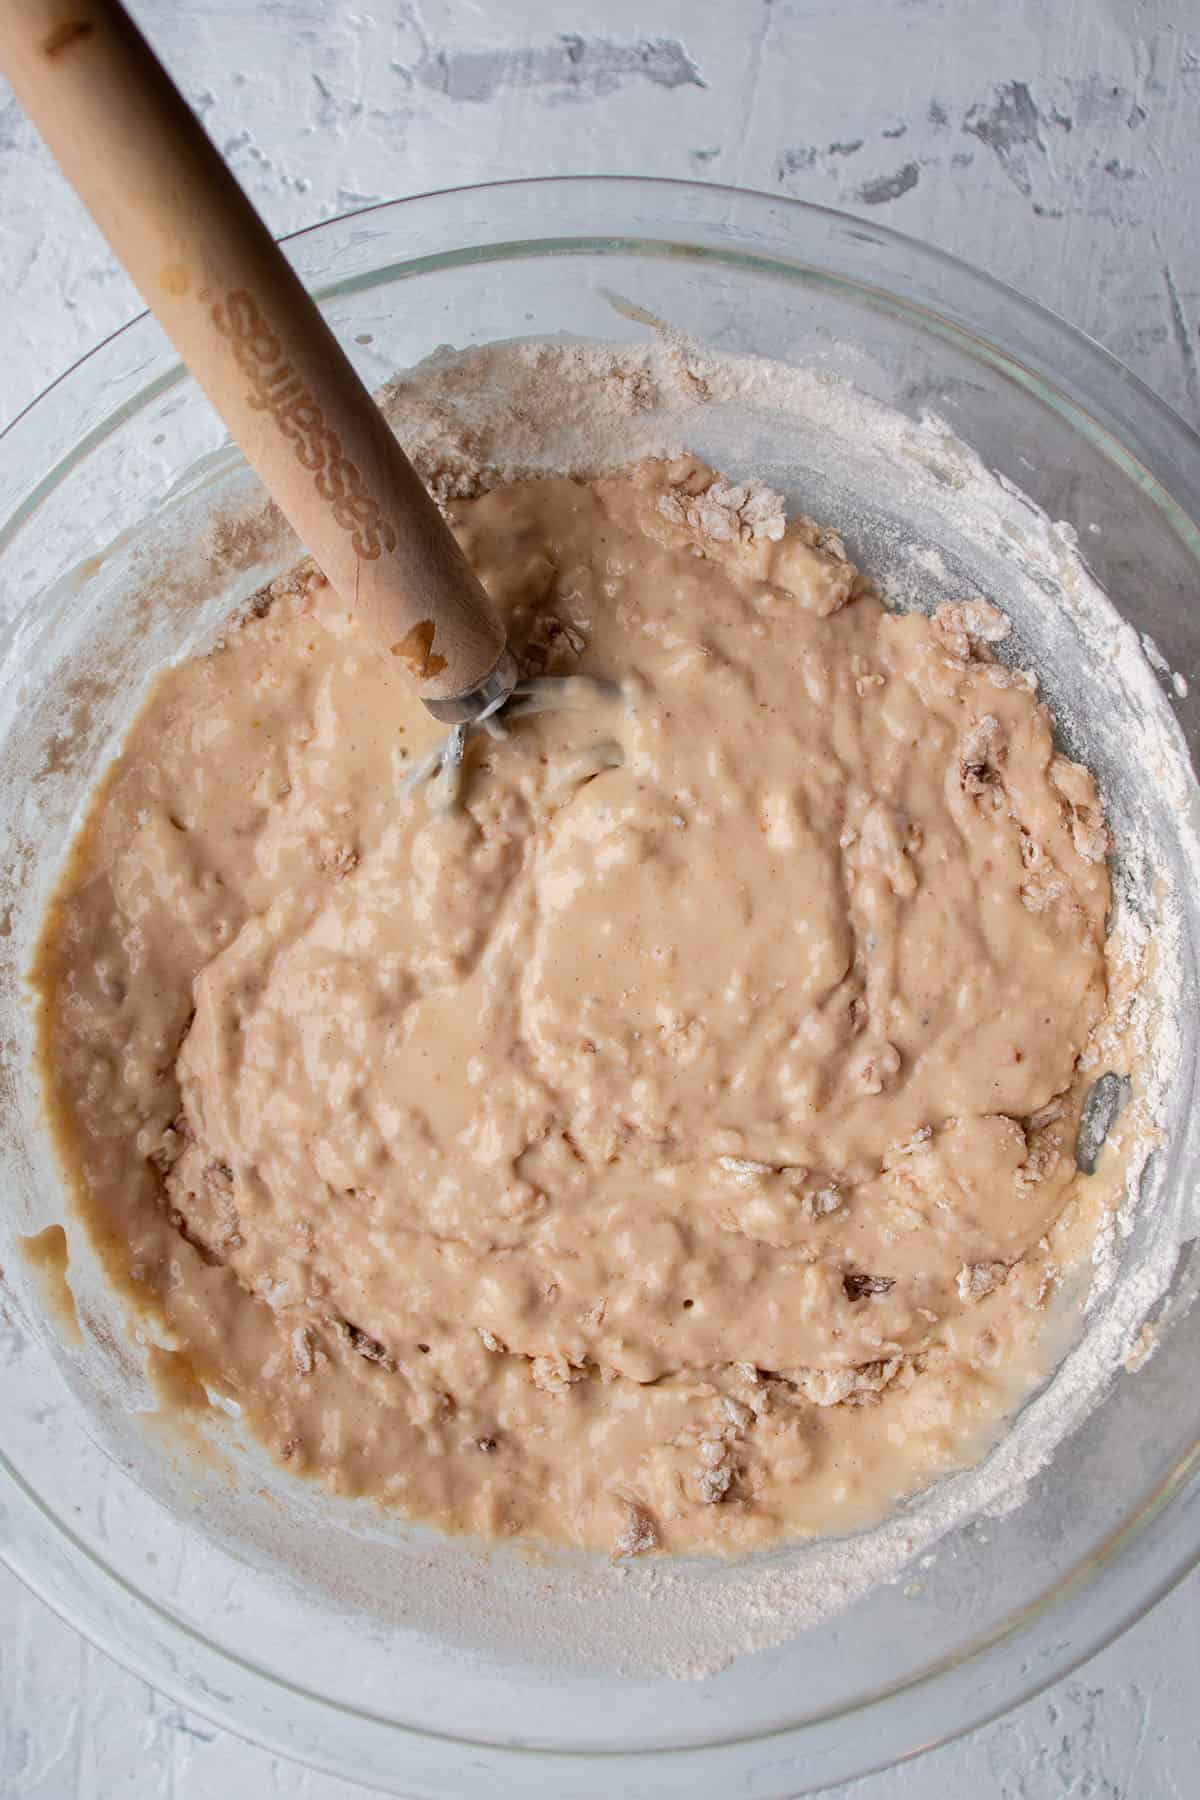 A glass bowl with a batter and a dough whisk mixing it up.